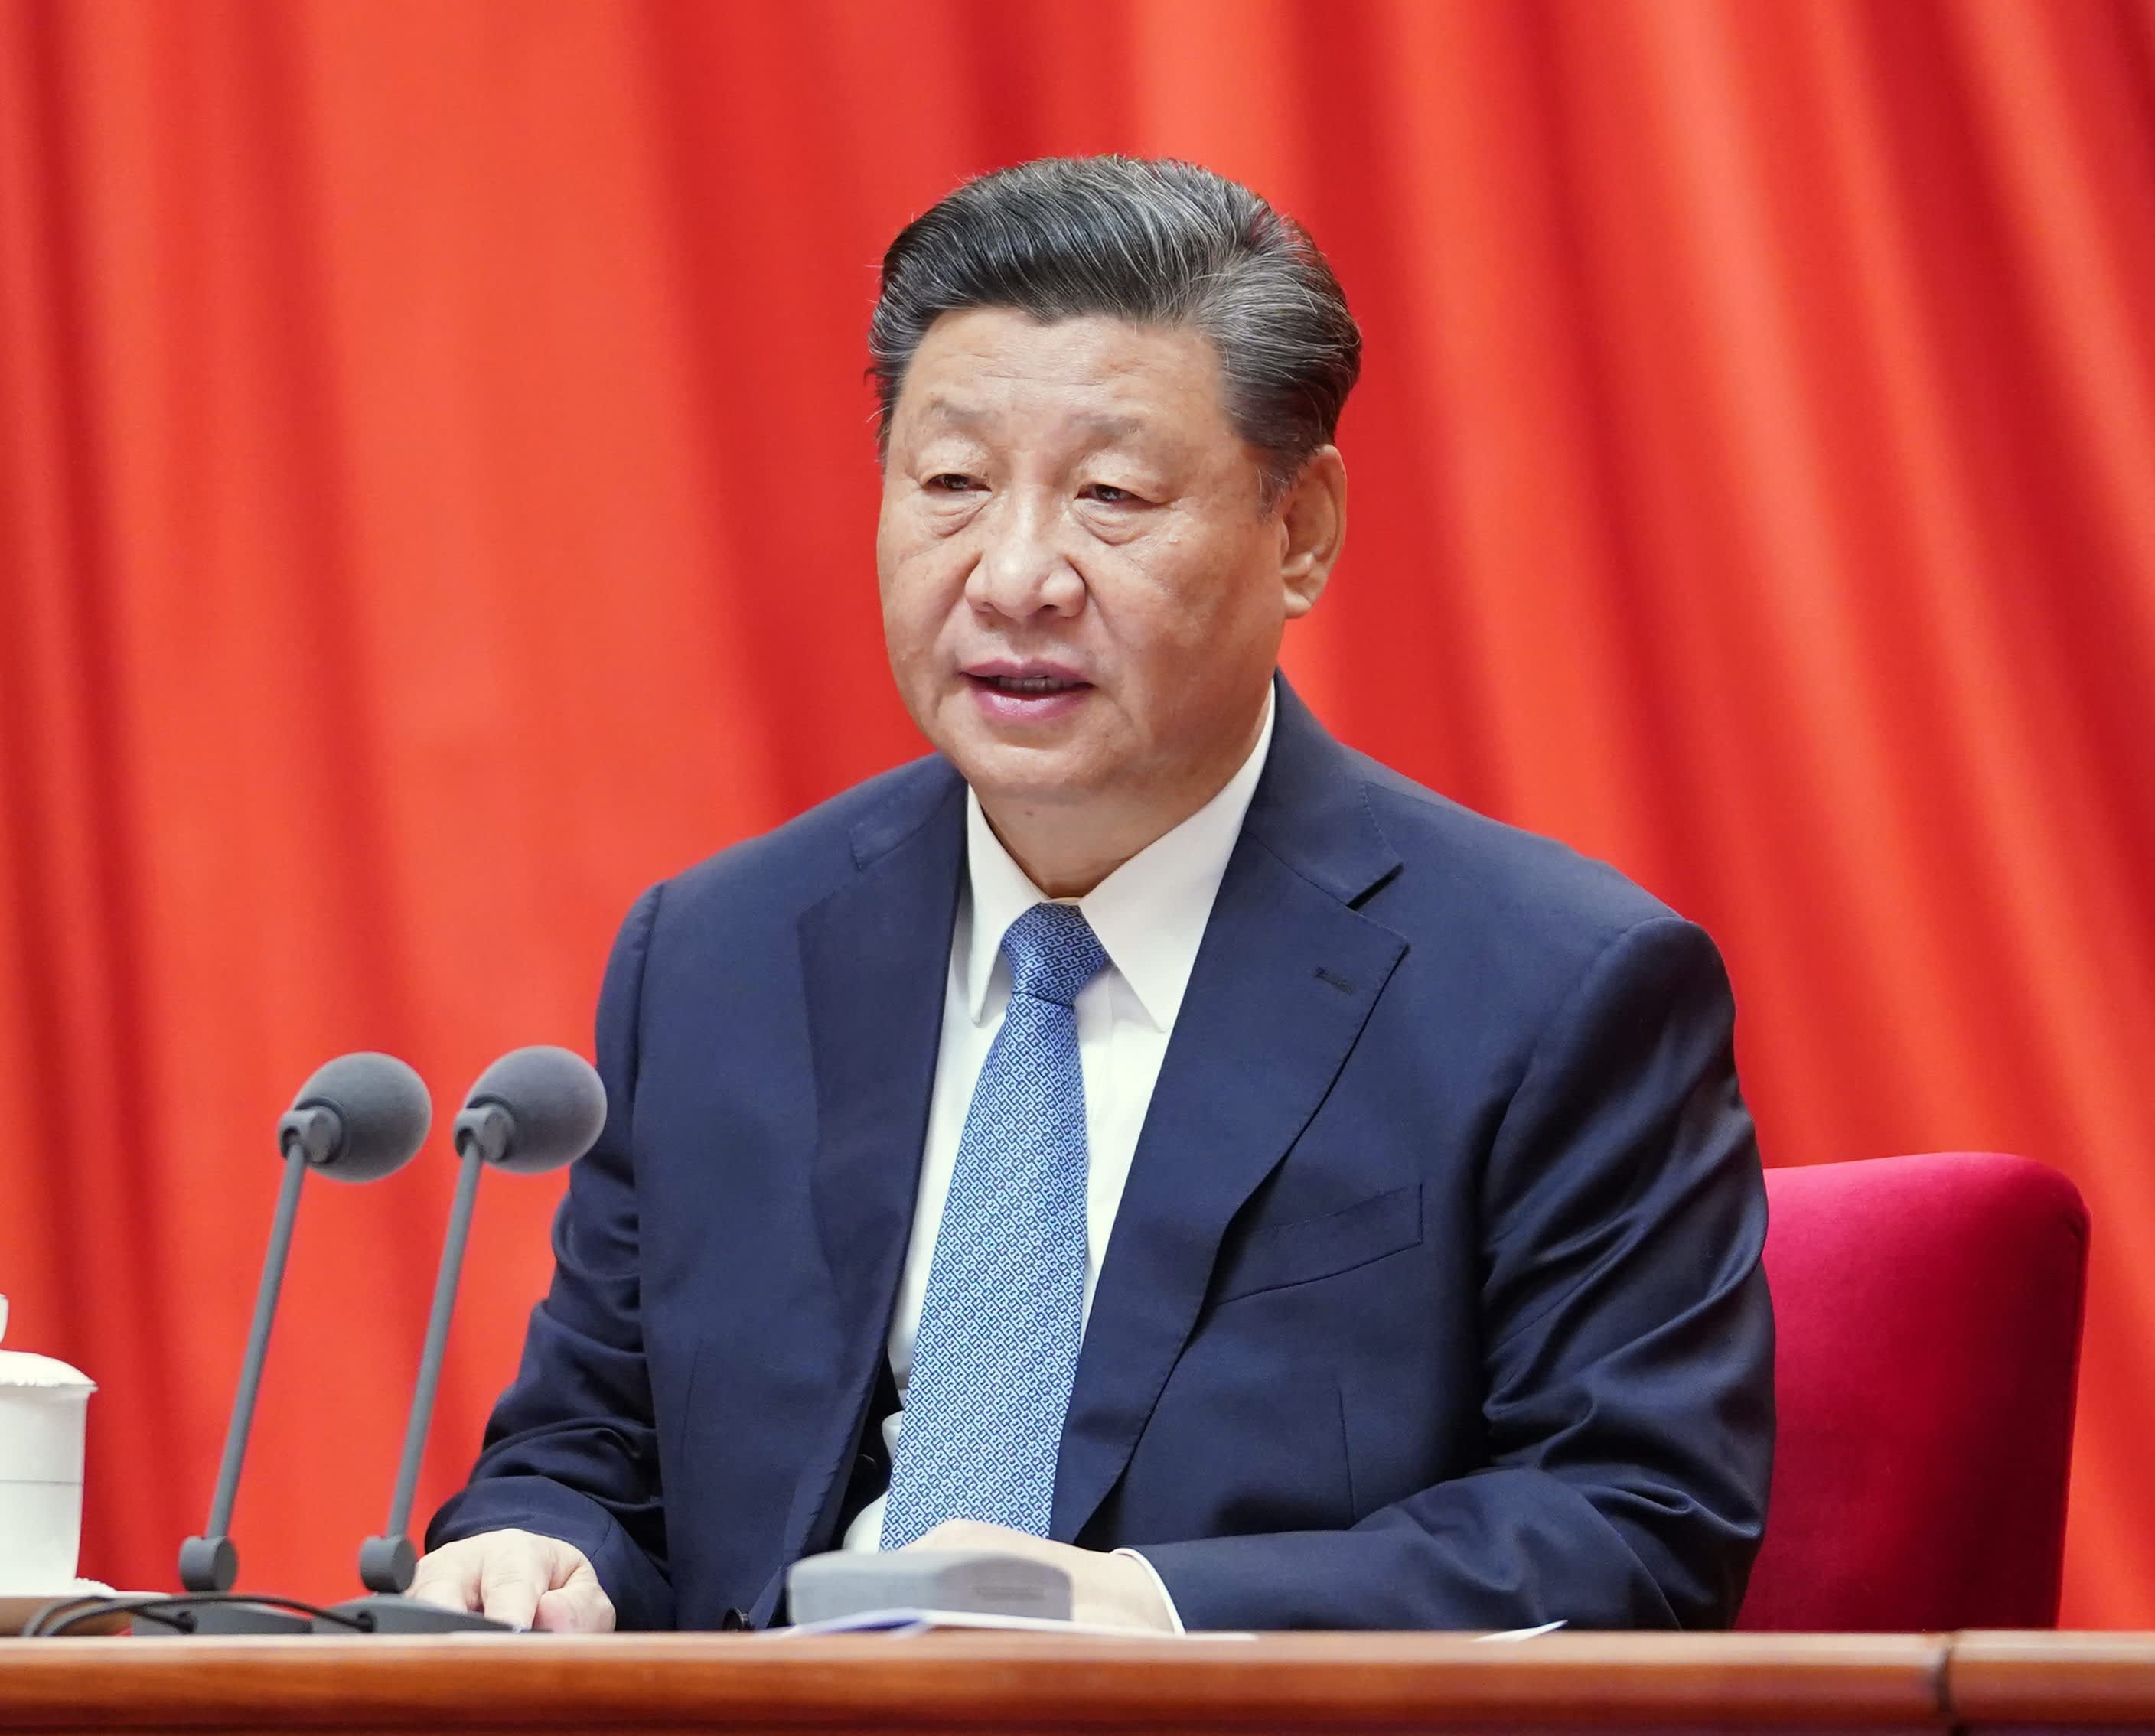 Xi calls for unity in Davos’ 2021 speech;  first observations of the Biden era